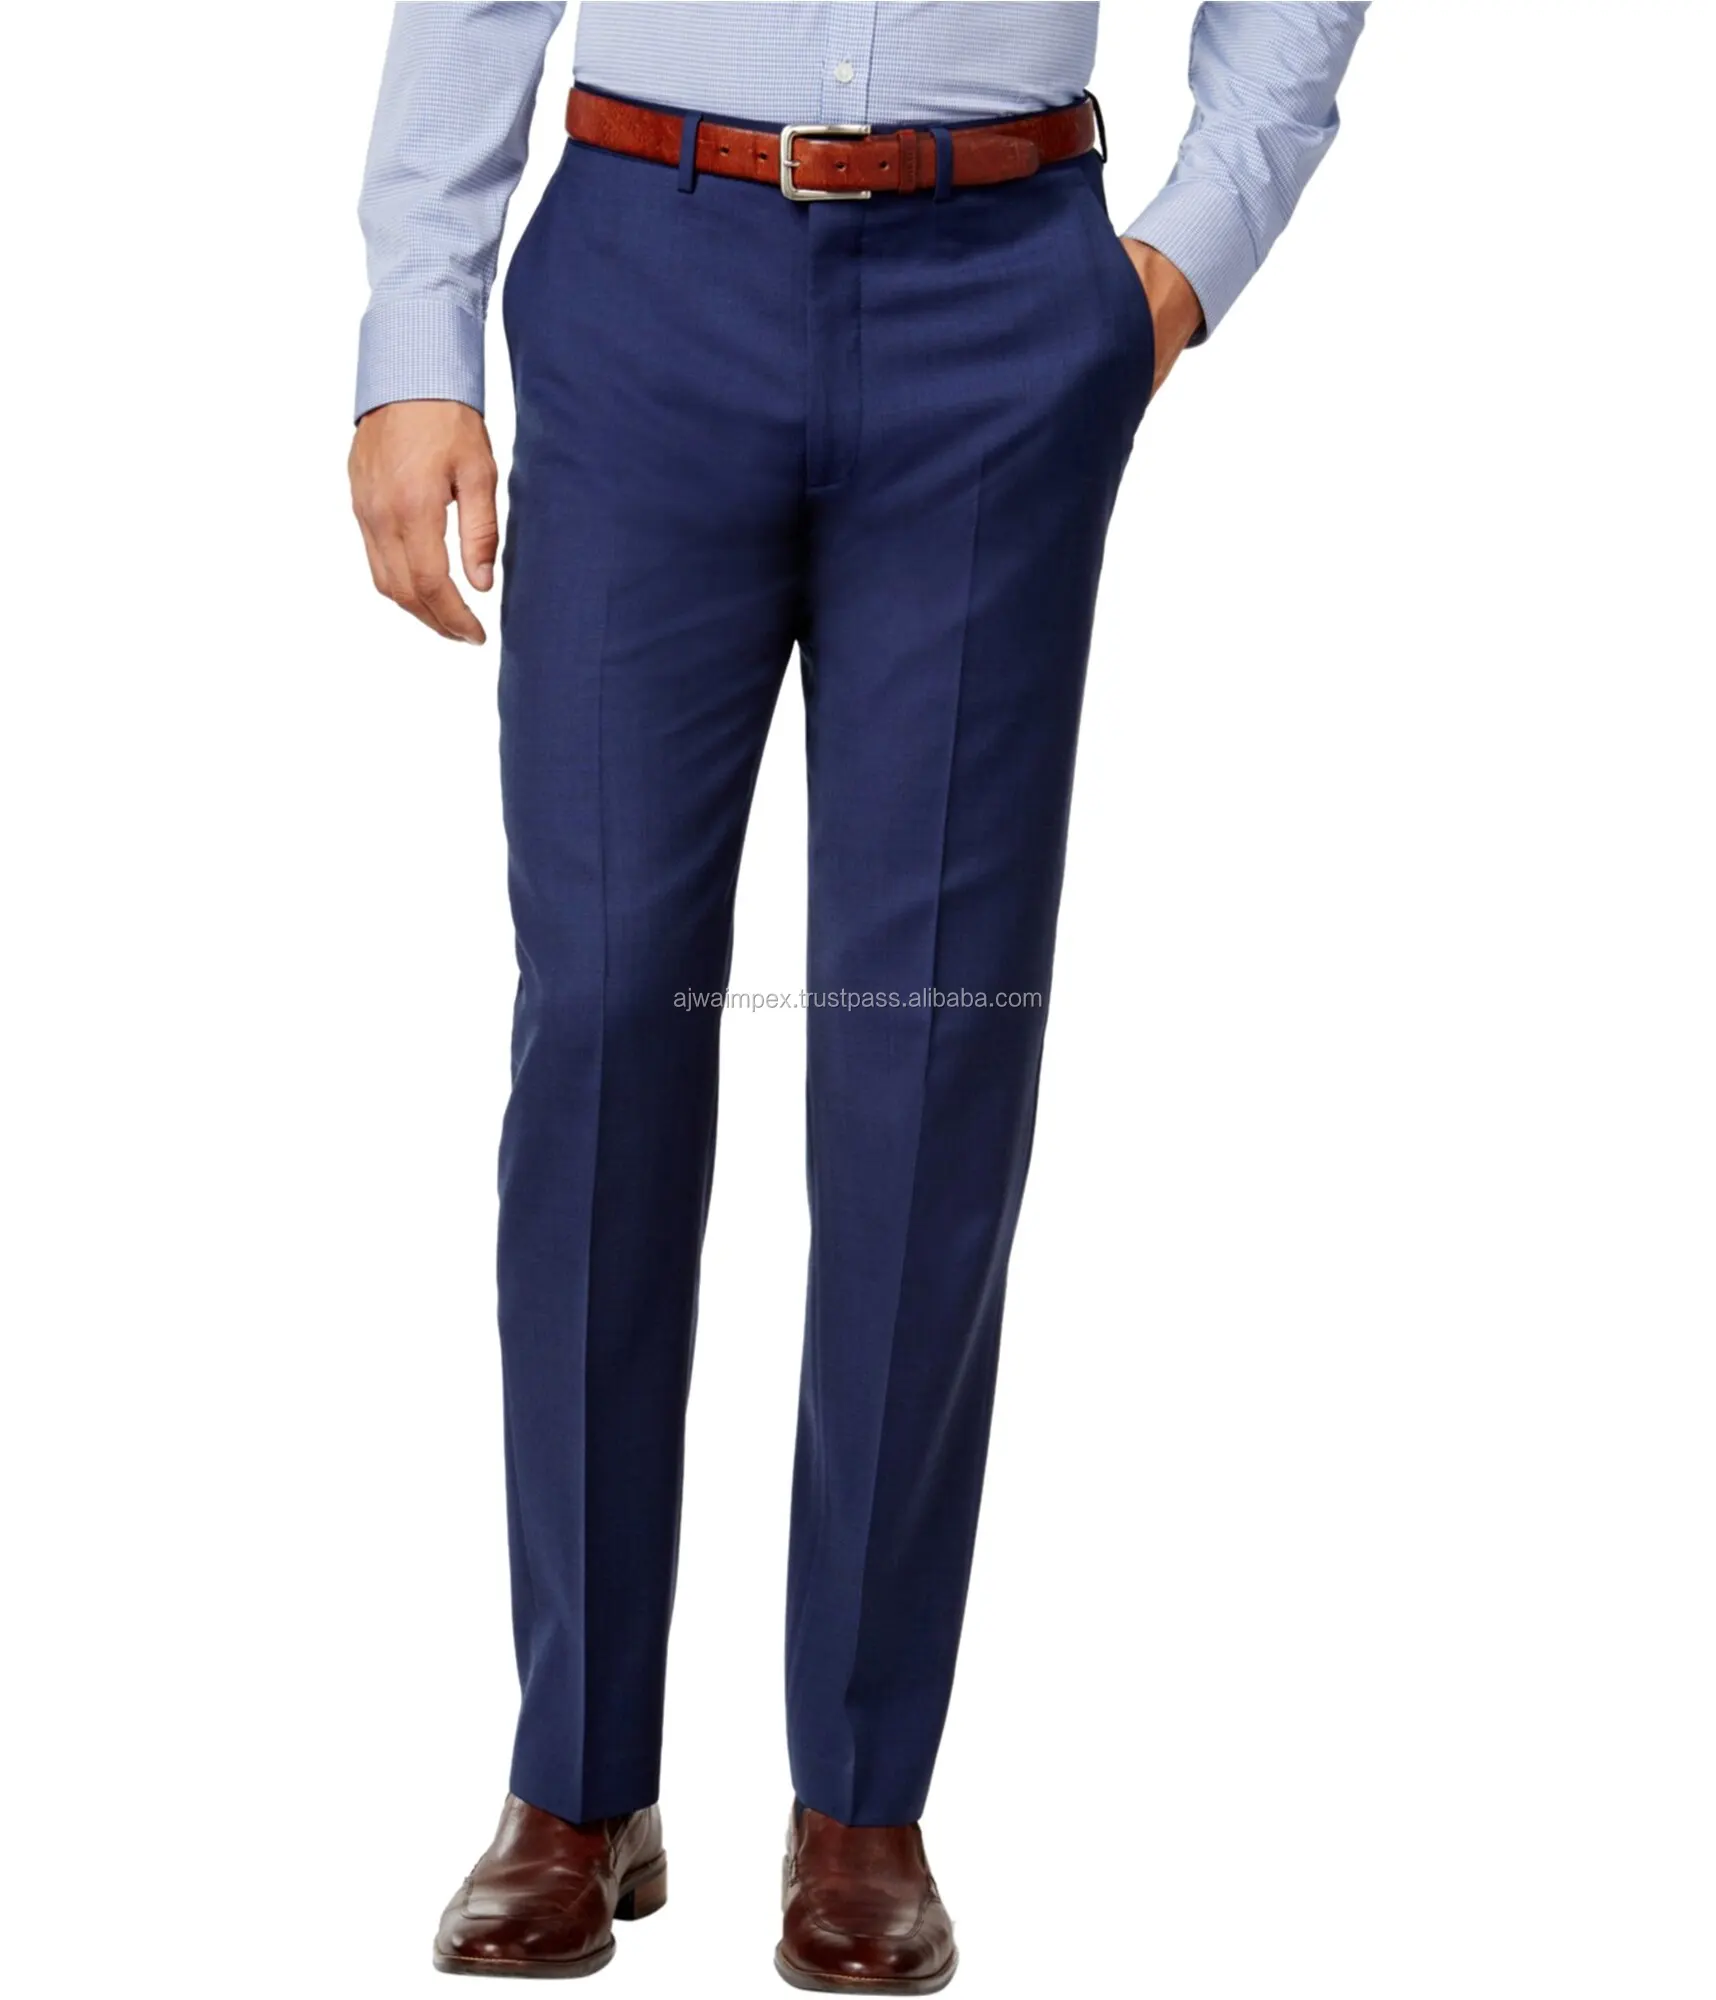 Trousers/pants (ट्राउज़र / पैंट) - Buy Online Latest Collection of Trousers/pants  for men in India at Best Price | Denim Trousers/pants, Slim fit Trousers /pants